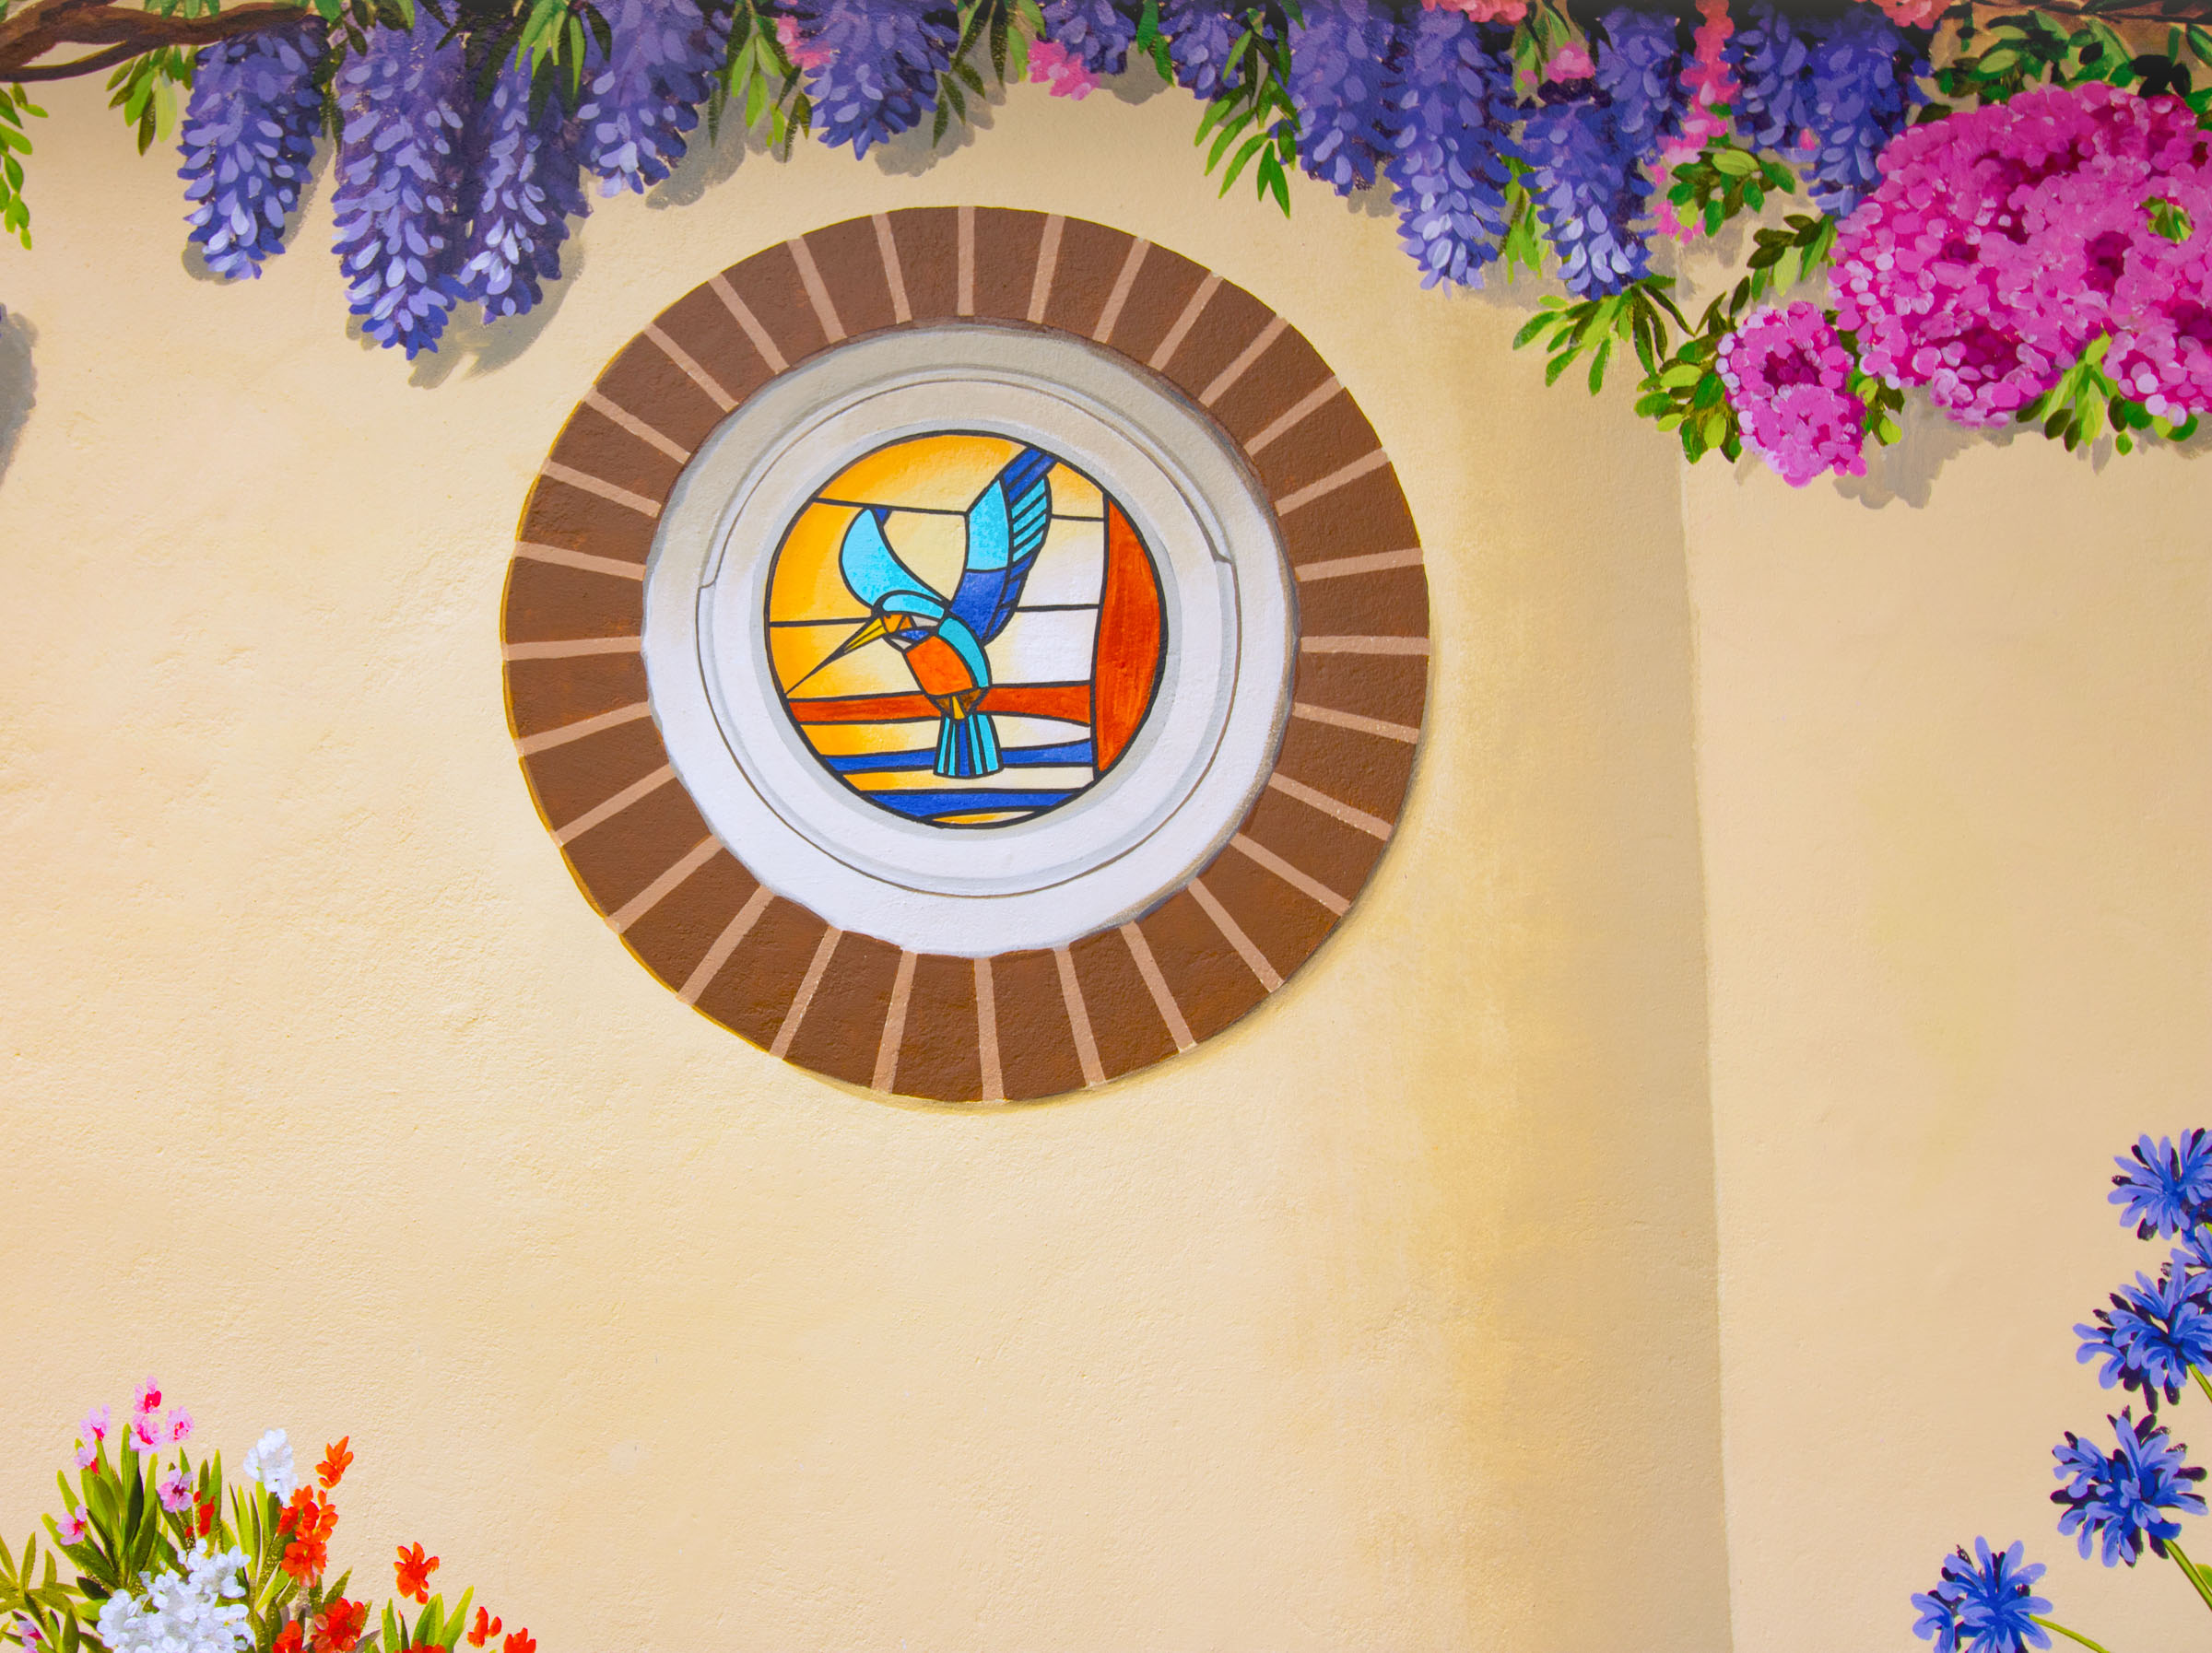 Trompe L'oeil circular brick window, with internally lit stained glass kingfisher